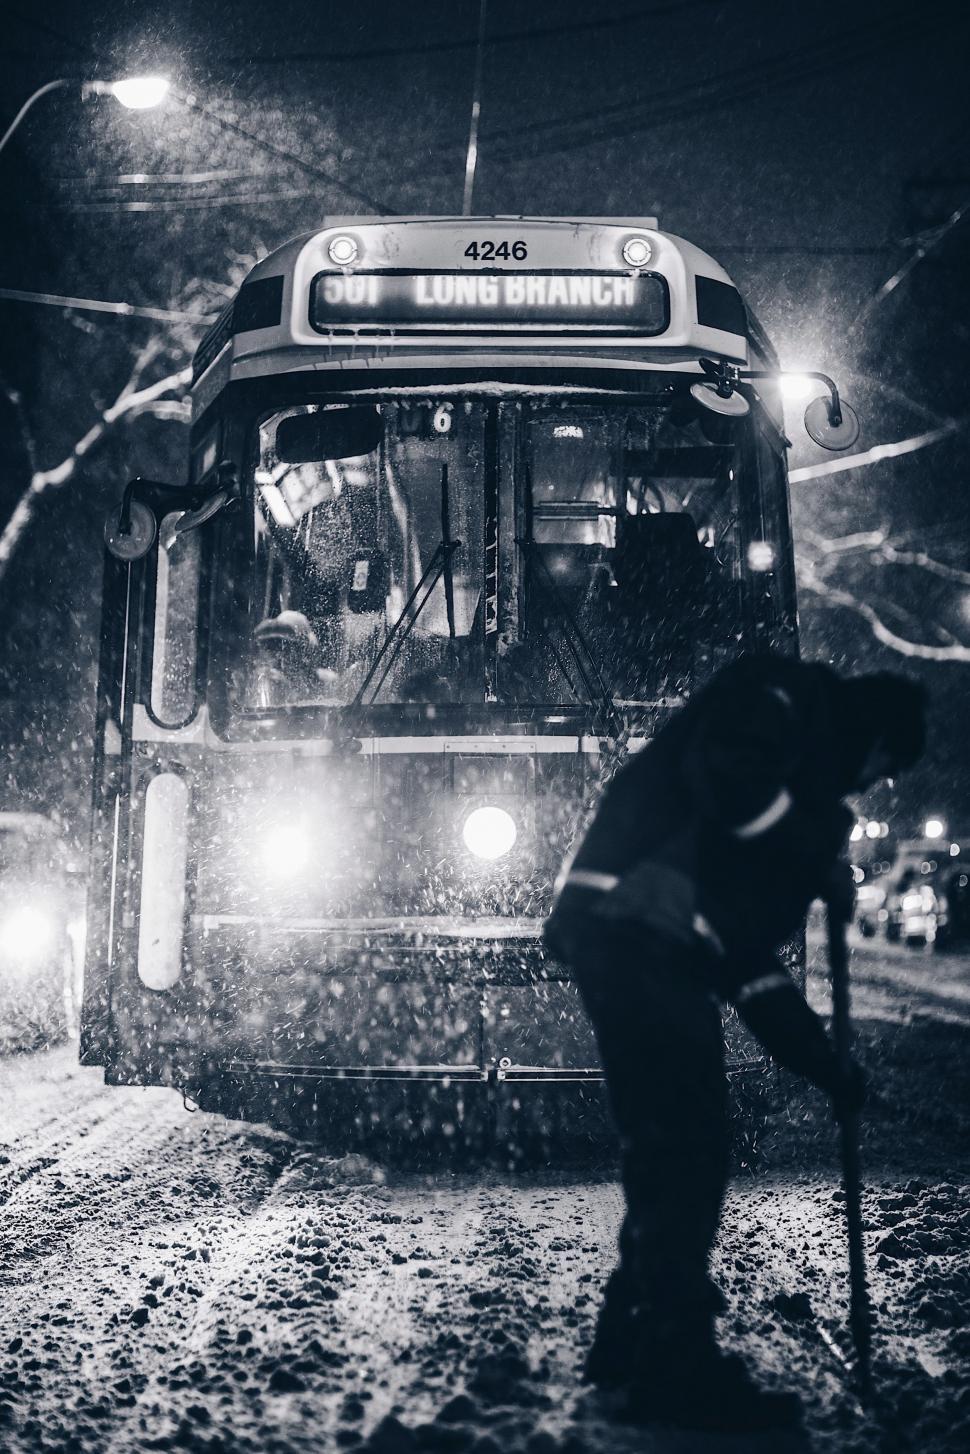 Free Image of Bus Driving Down Snow Covered Street at Night 